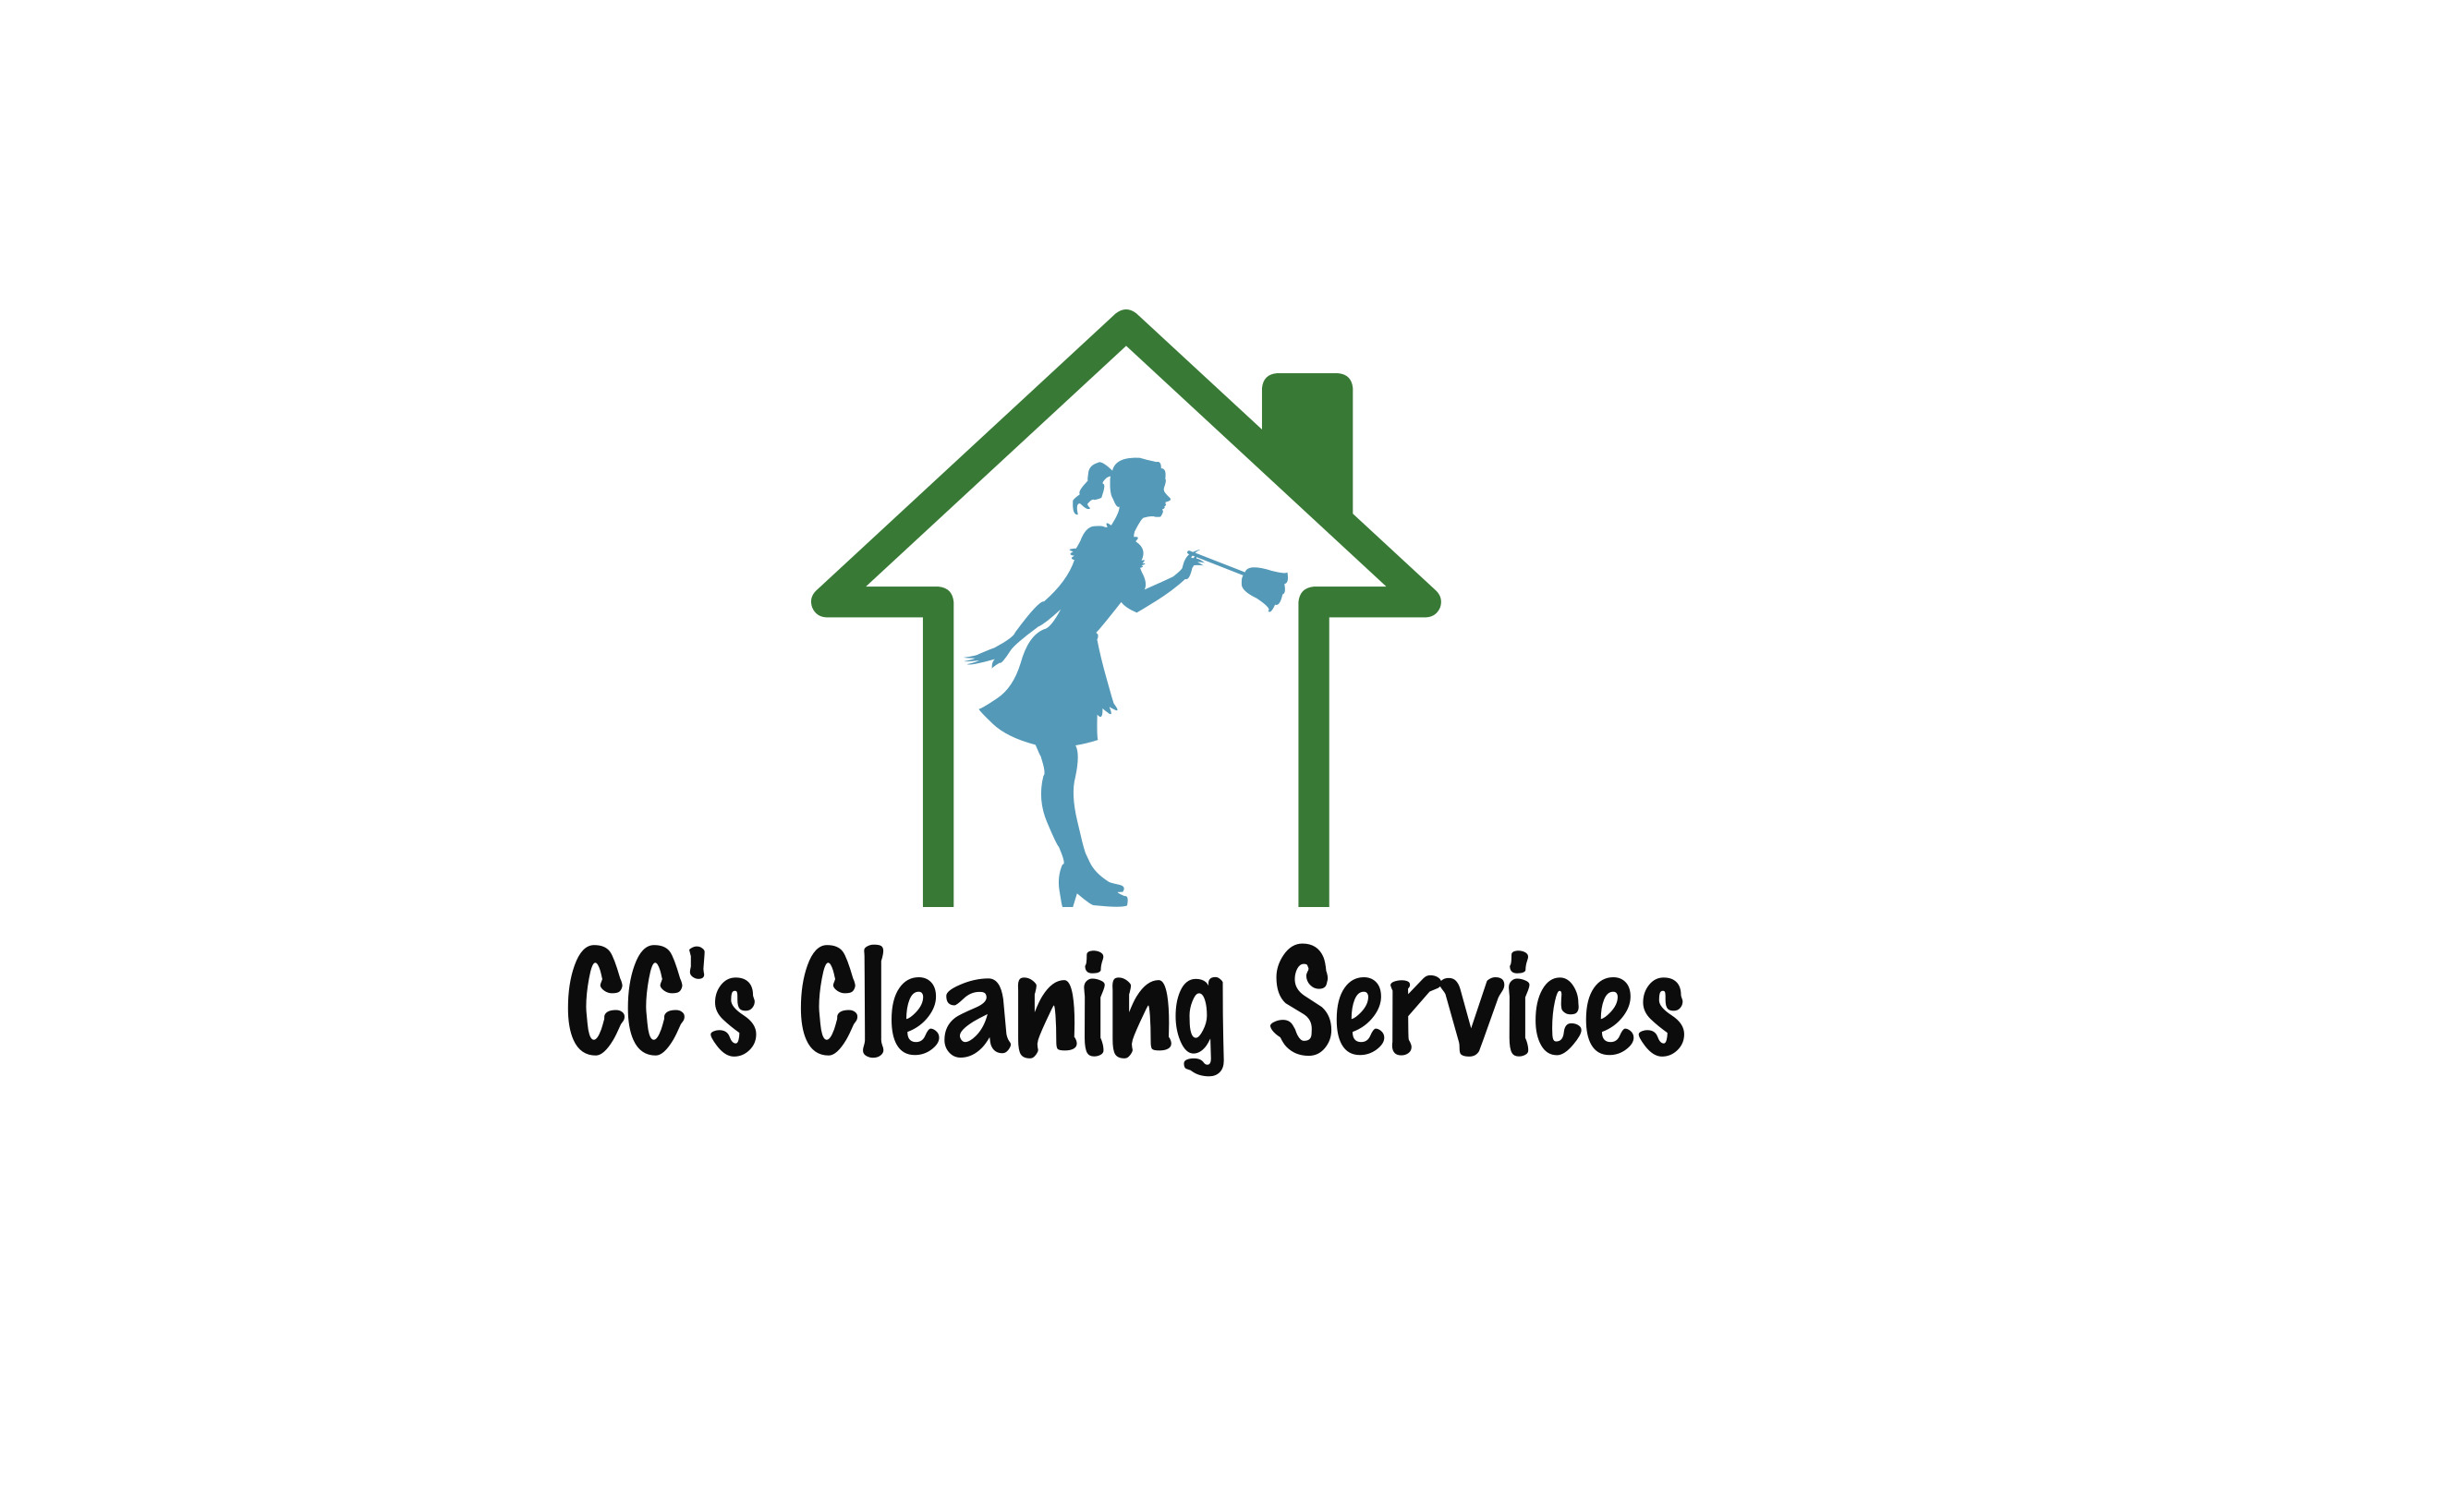 CC's Cleaning Services Logo